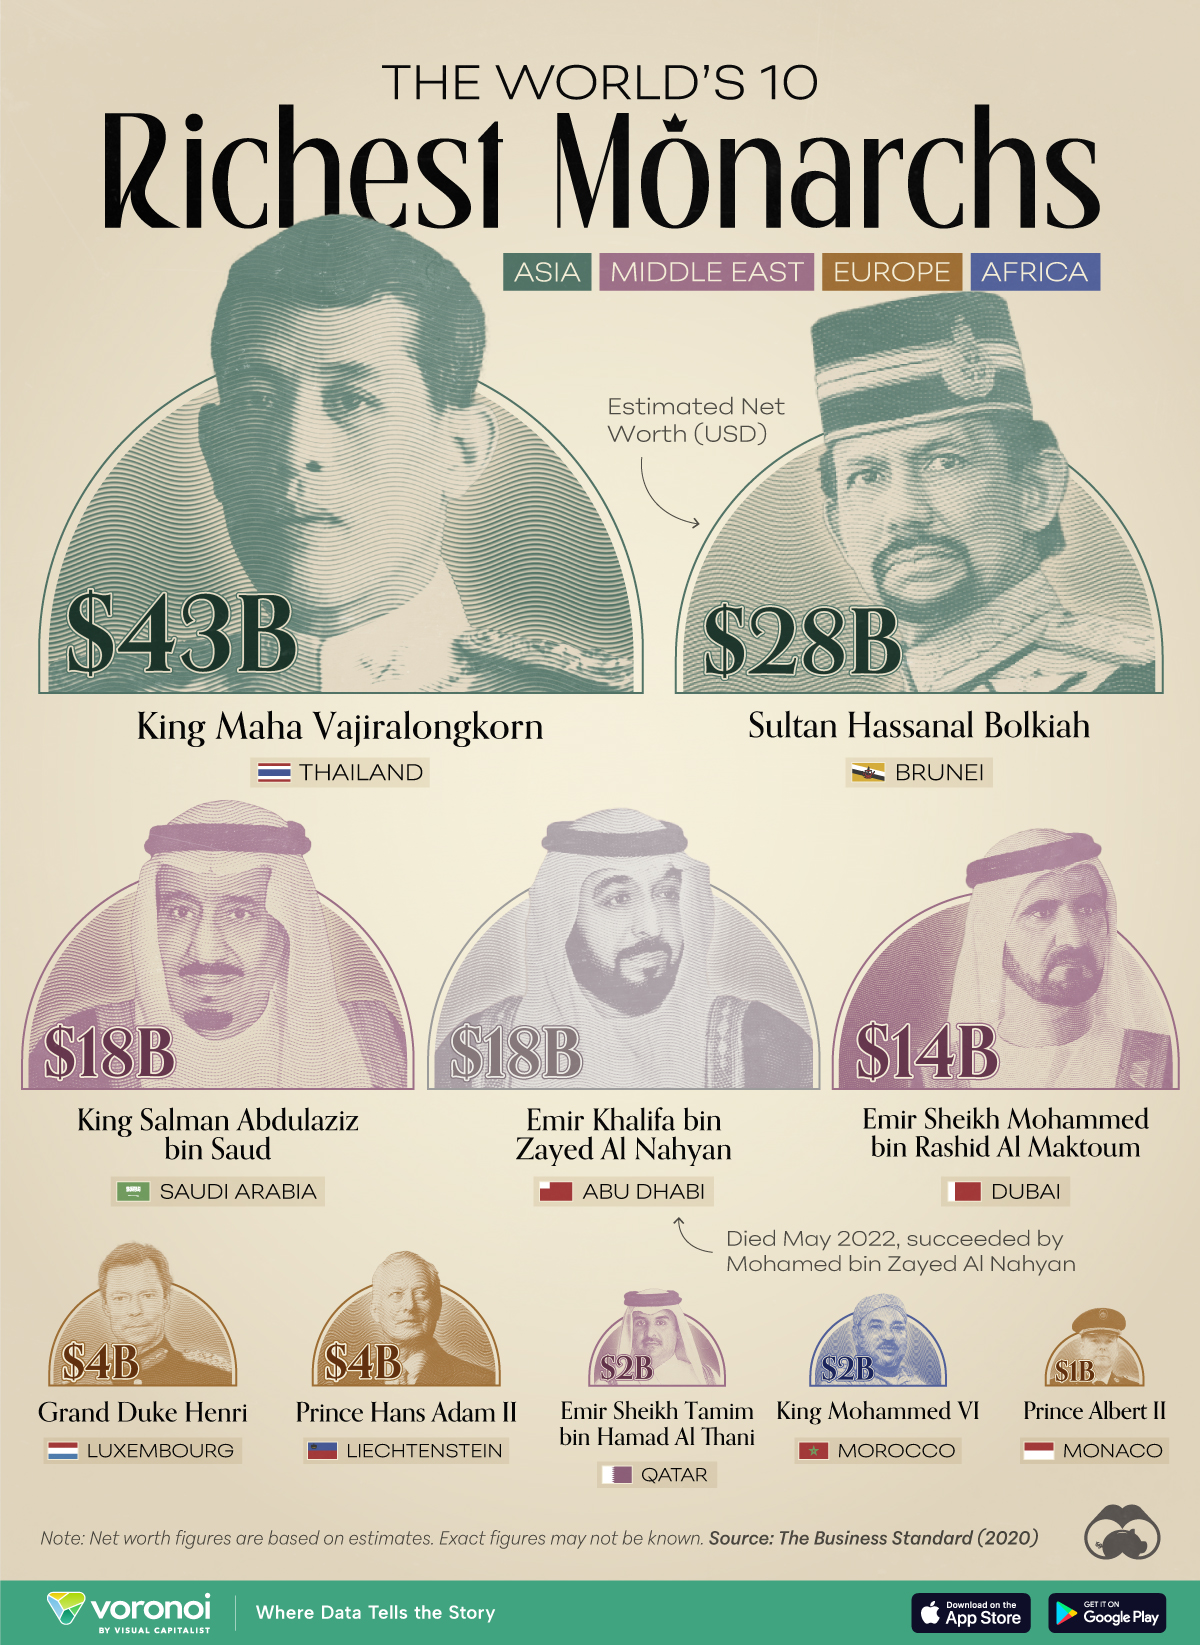 A chart with the names and estimated net worth of the world's richest monarchs.